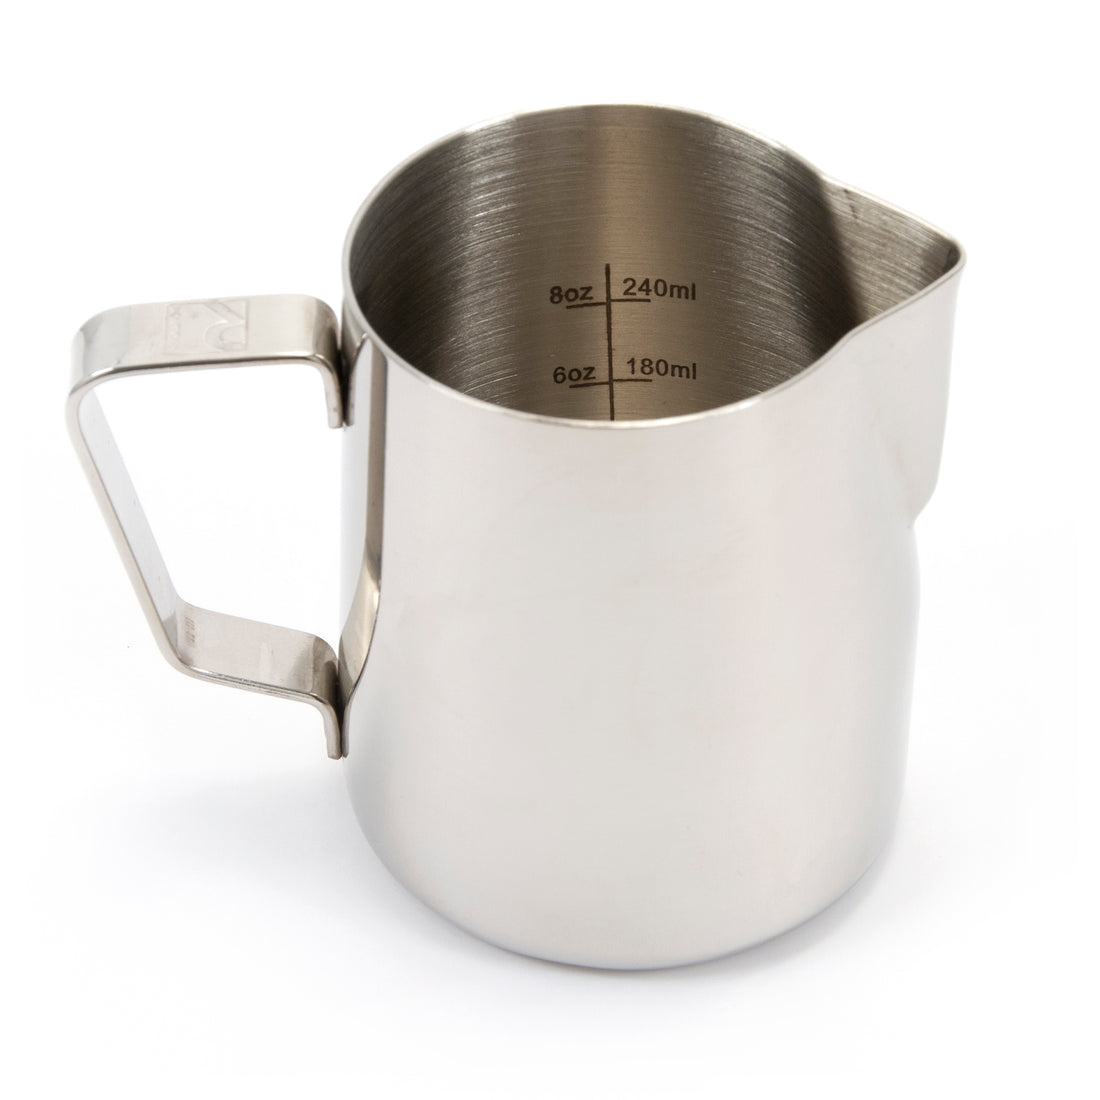 Bellemain Milk Frothing Pitcher 12 oz